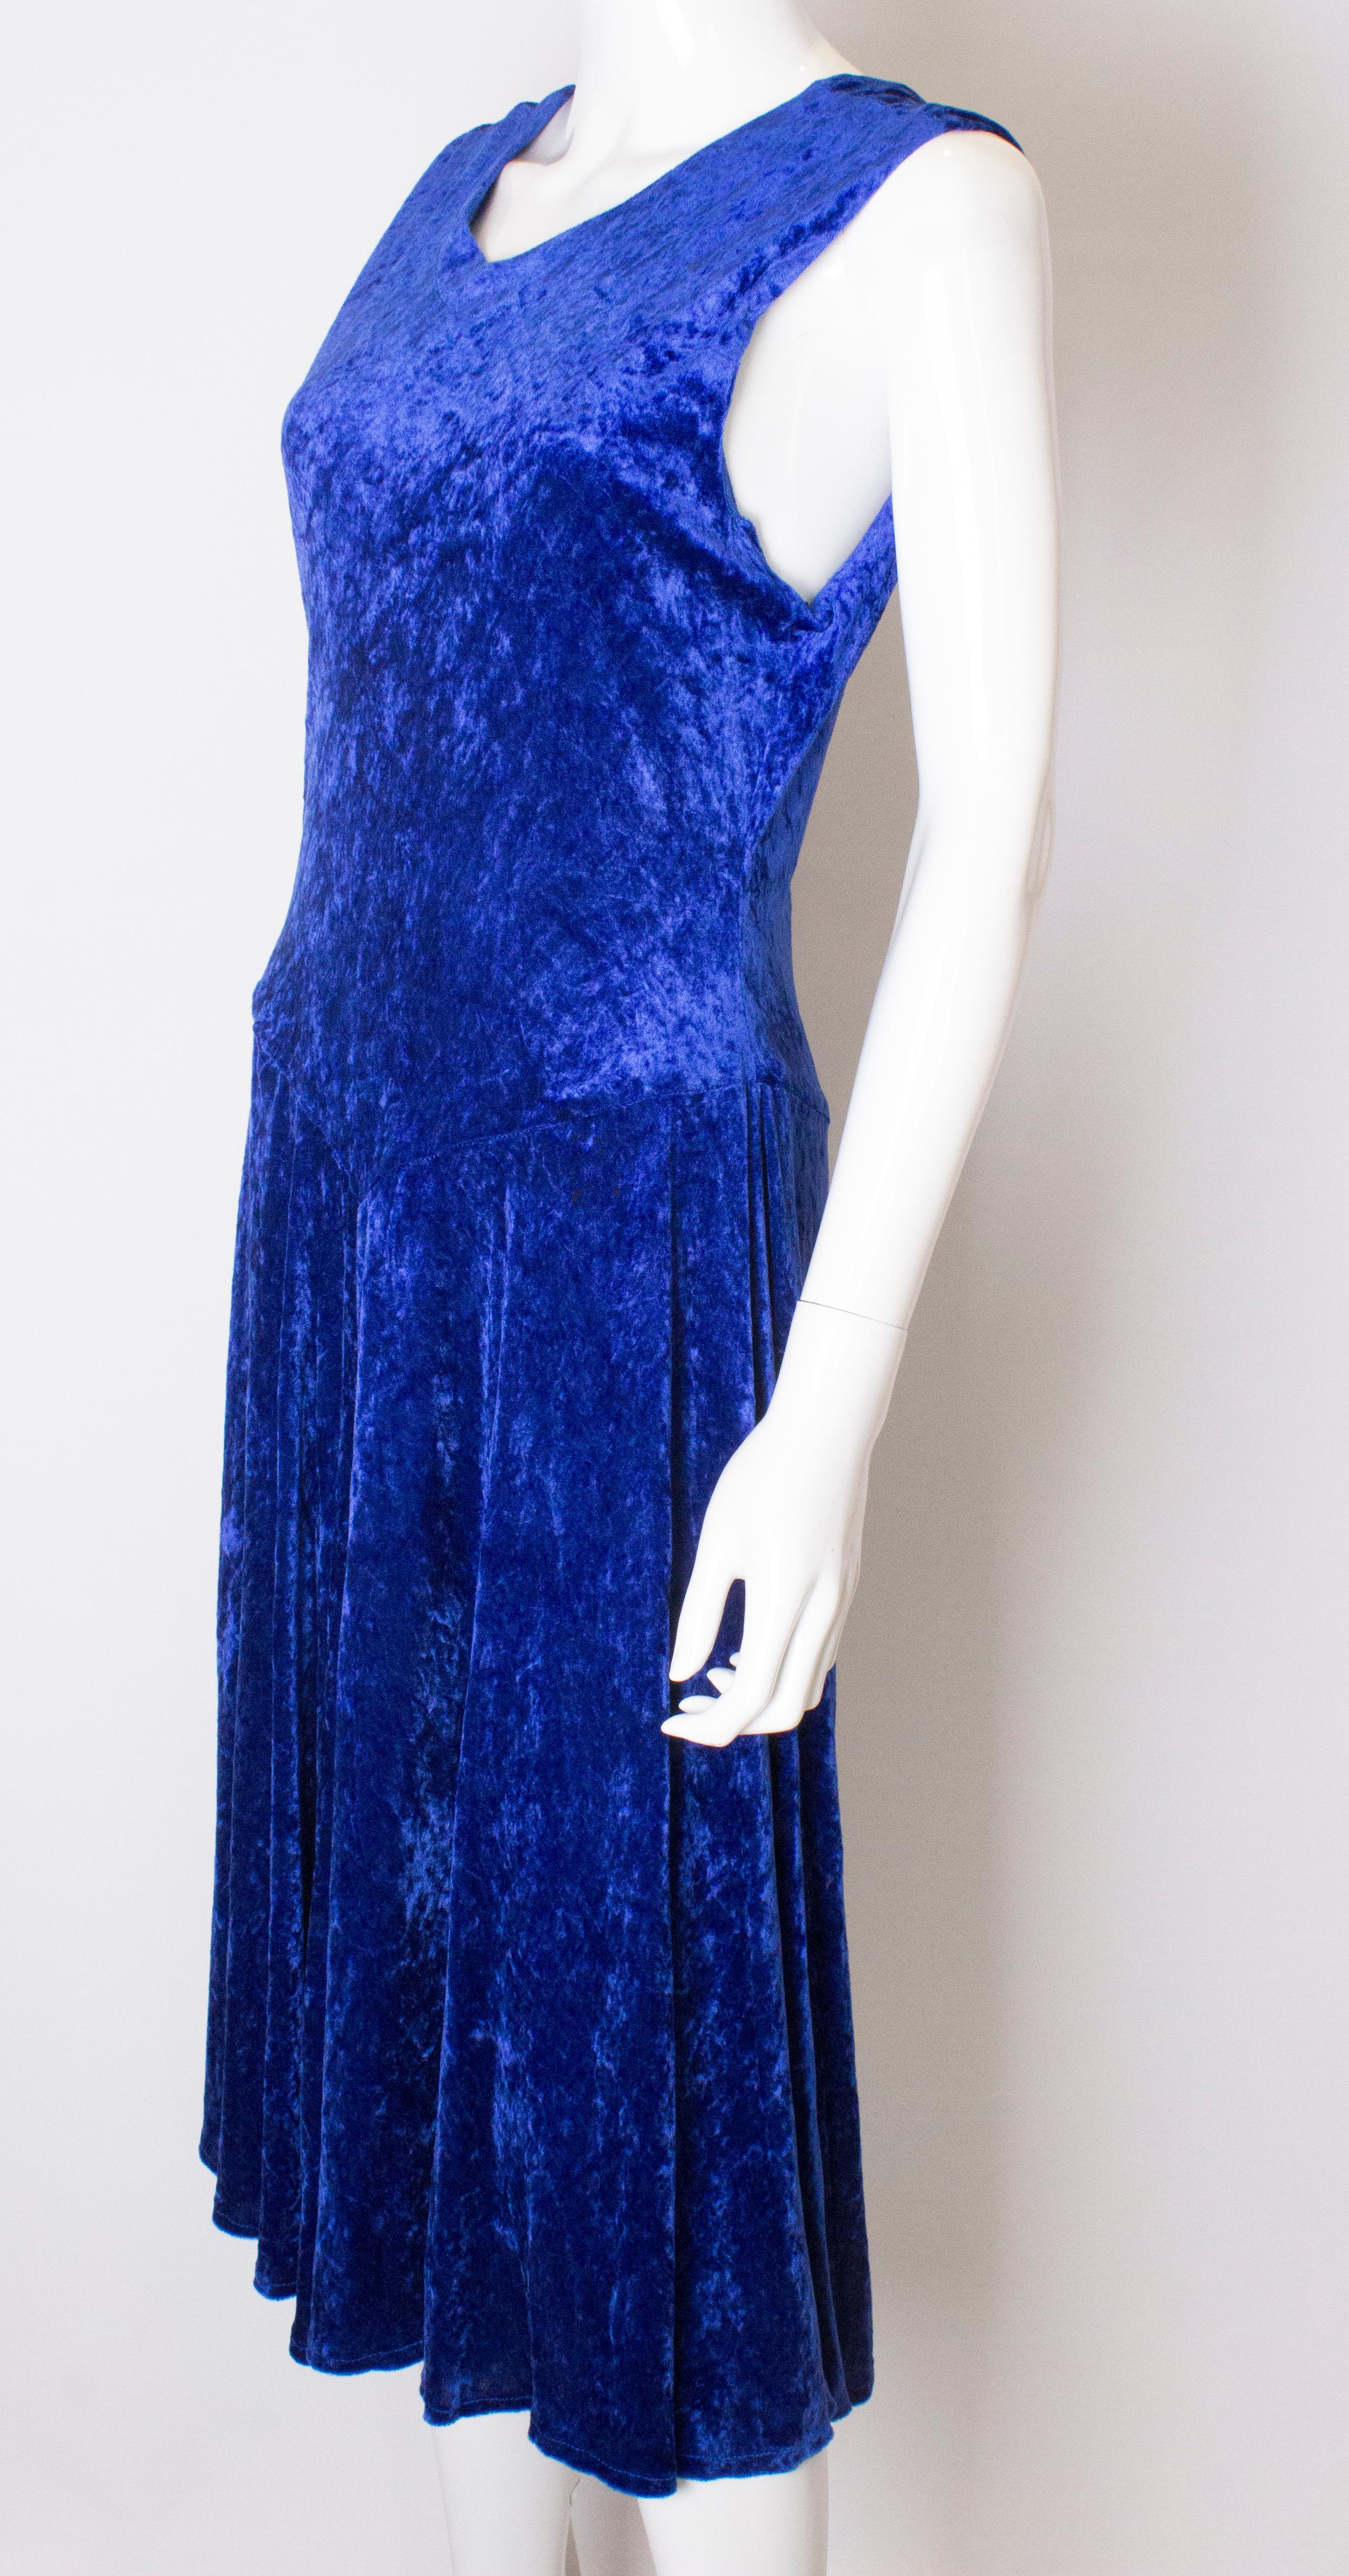 Vintage Velvet Dress by Jinty In Good Condition For Sale In London, GB